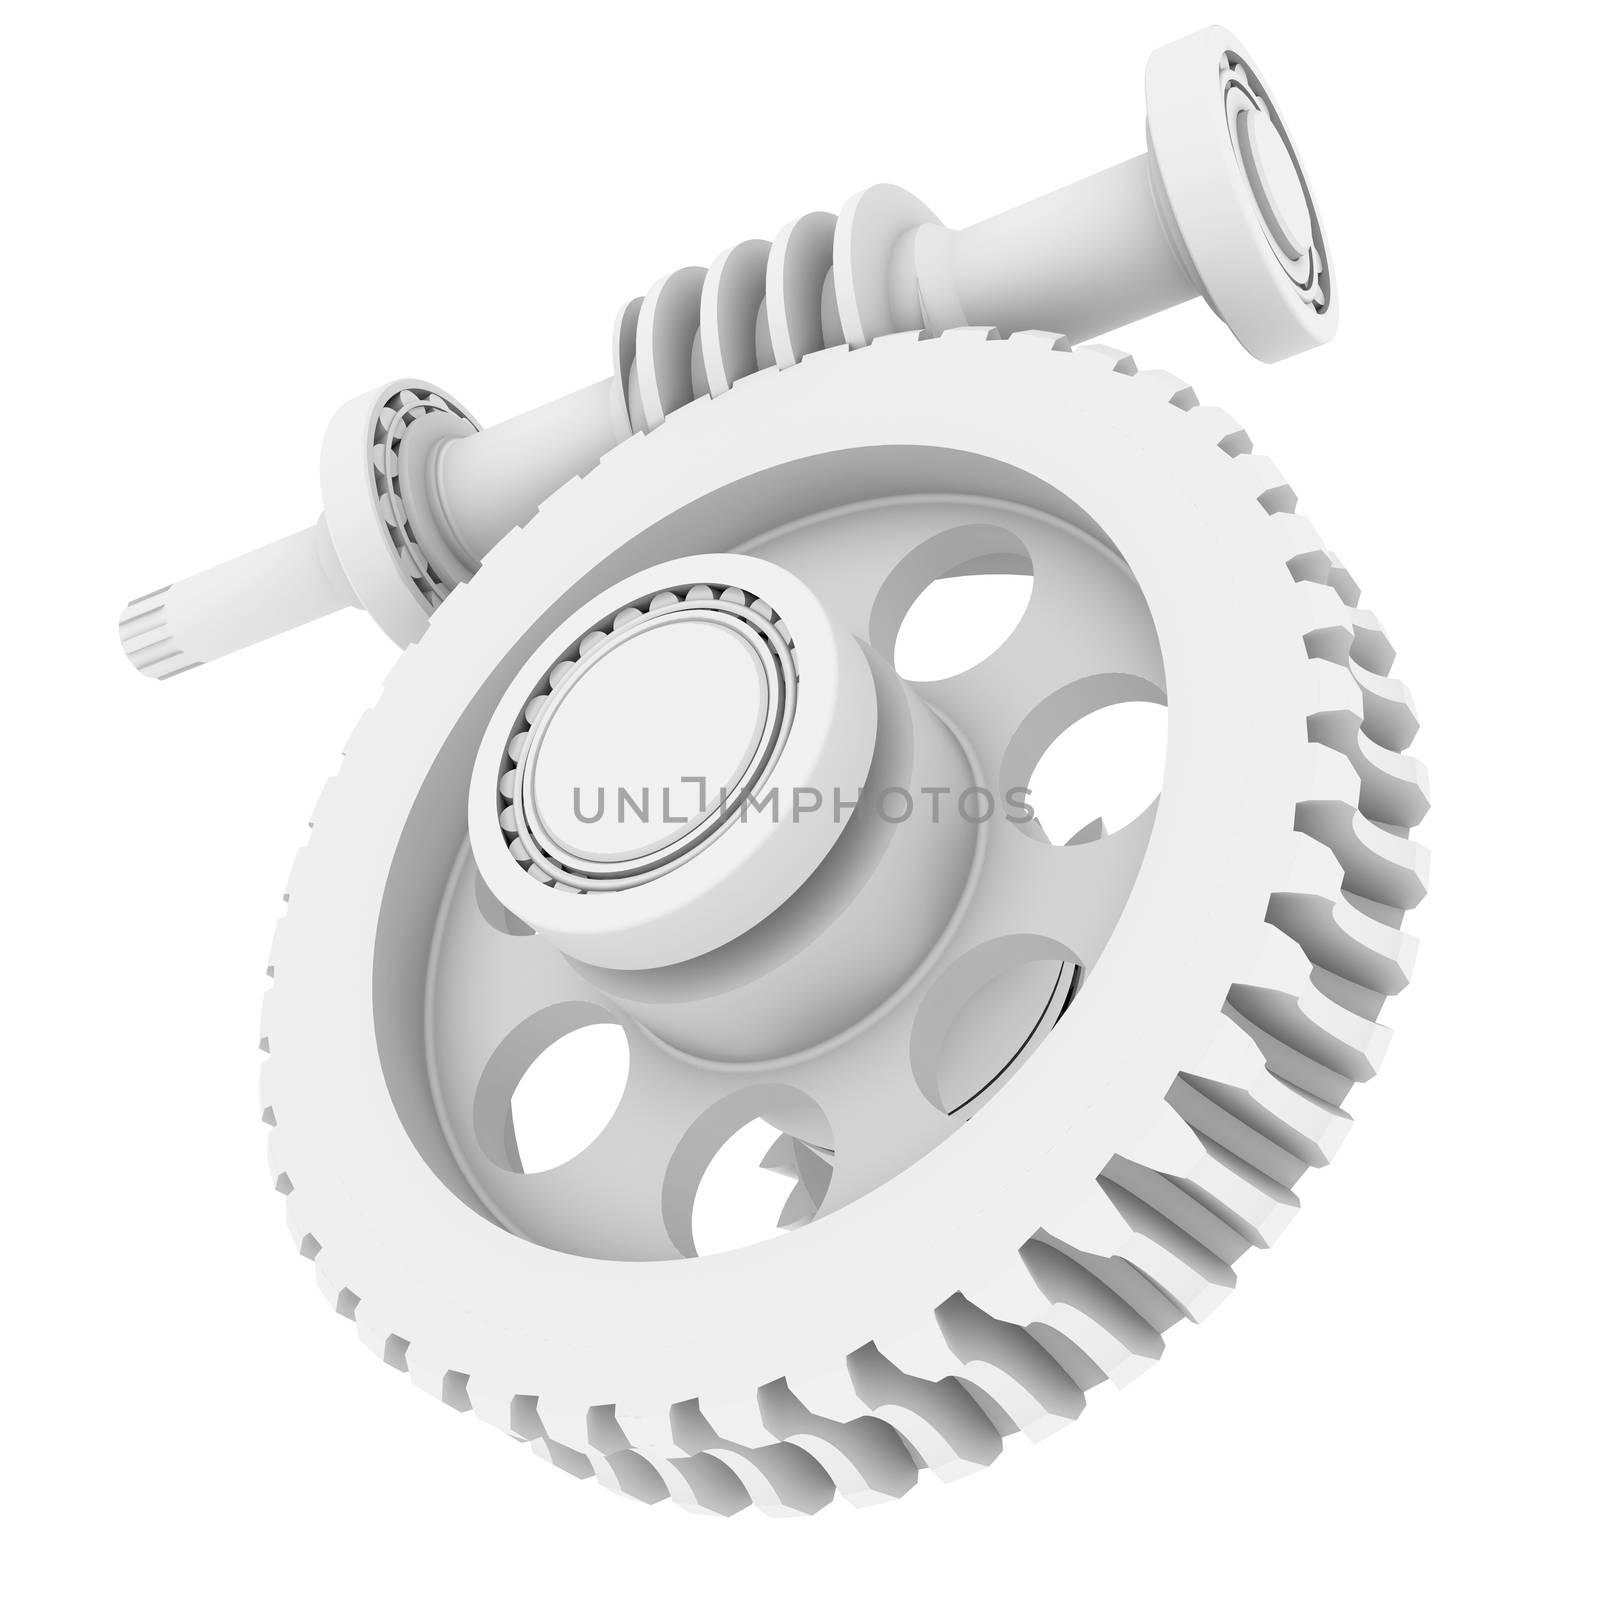 White shafts, gears and bearings by cherezoff